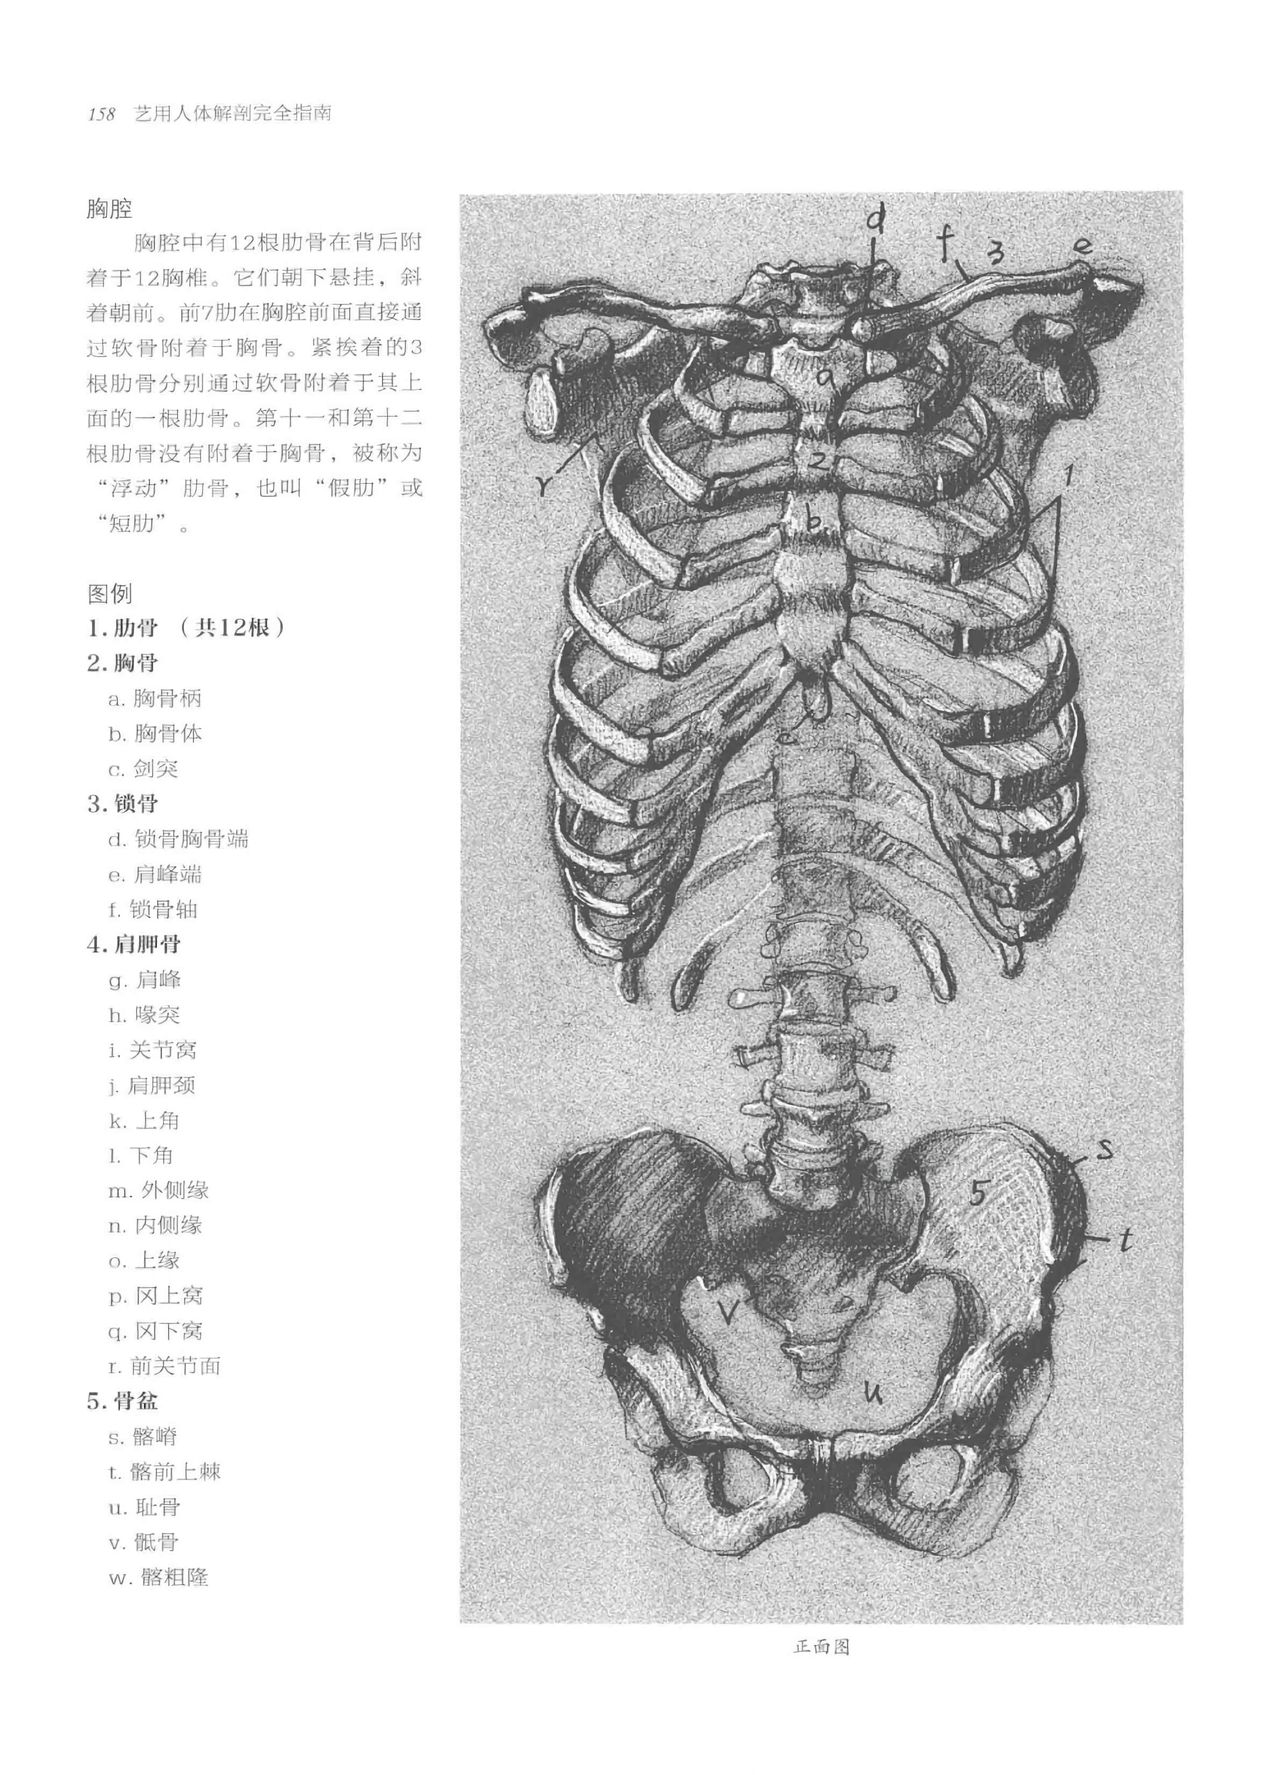 Anatomy-A Complete Guide for Artists - Joseph Sheppard [Chinese] 158